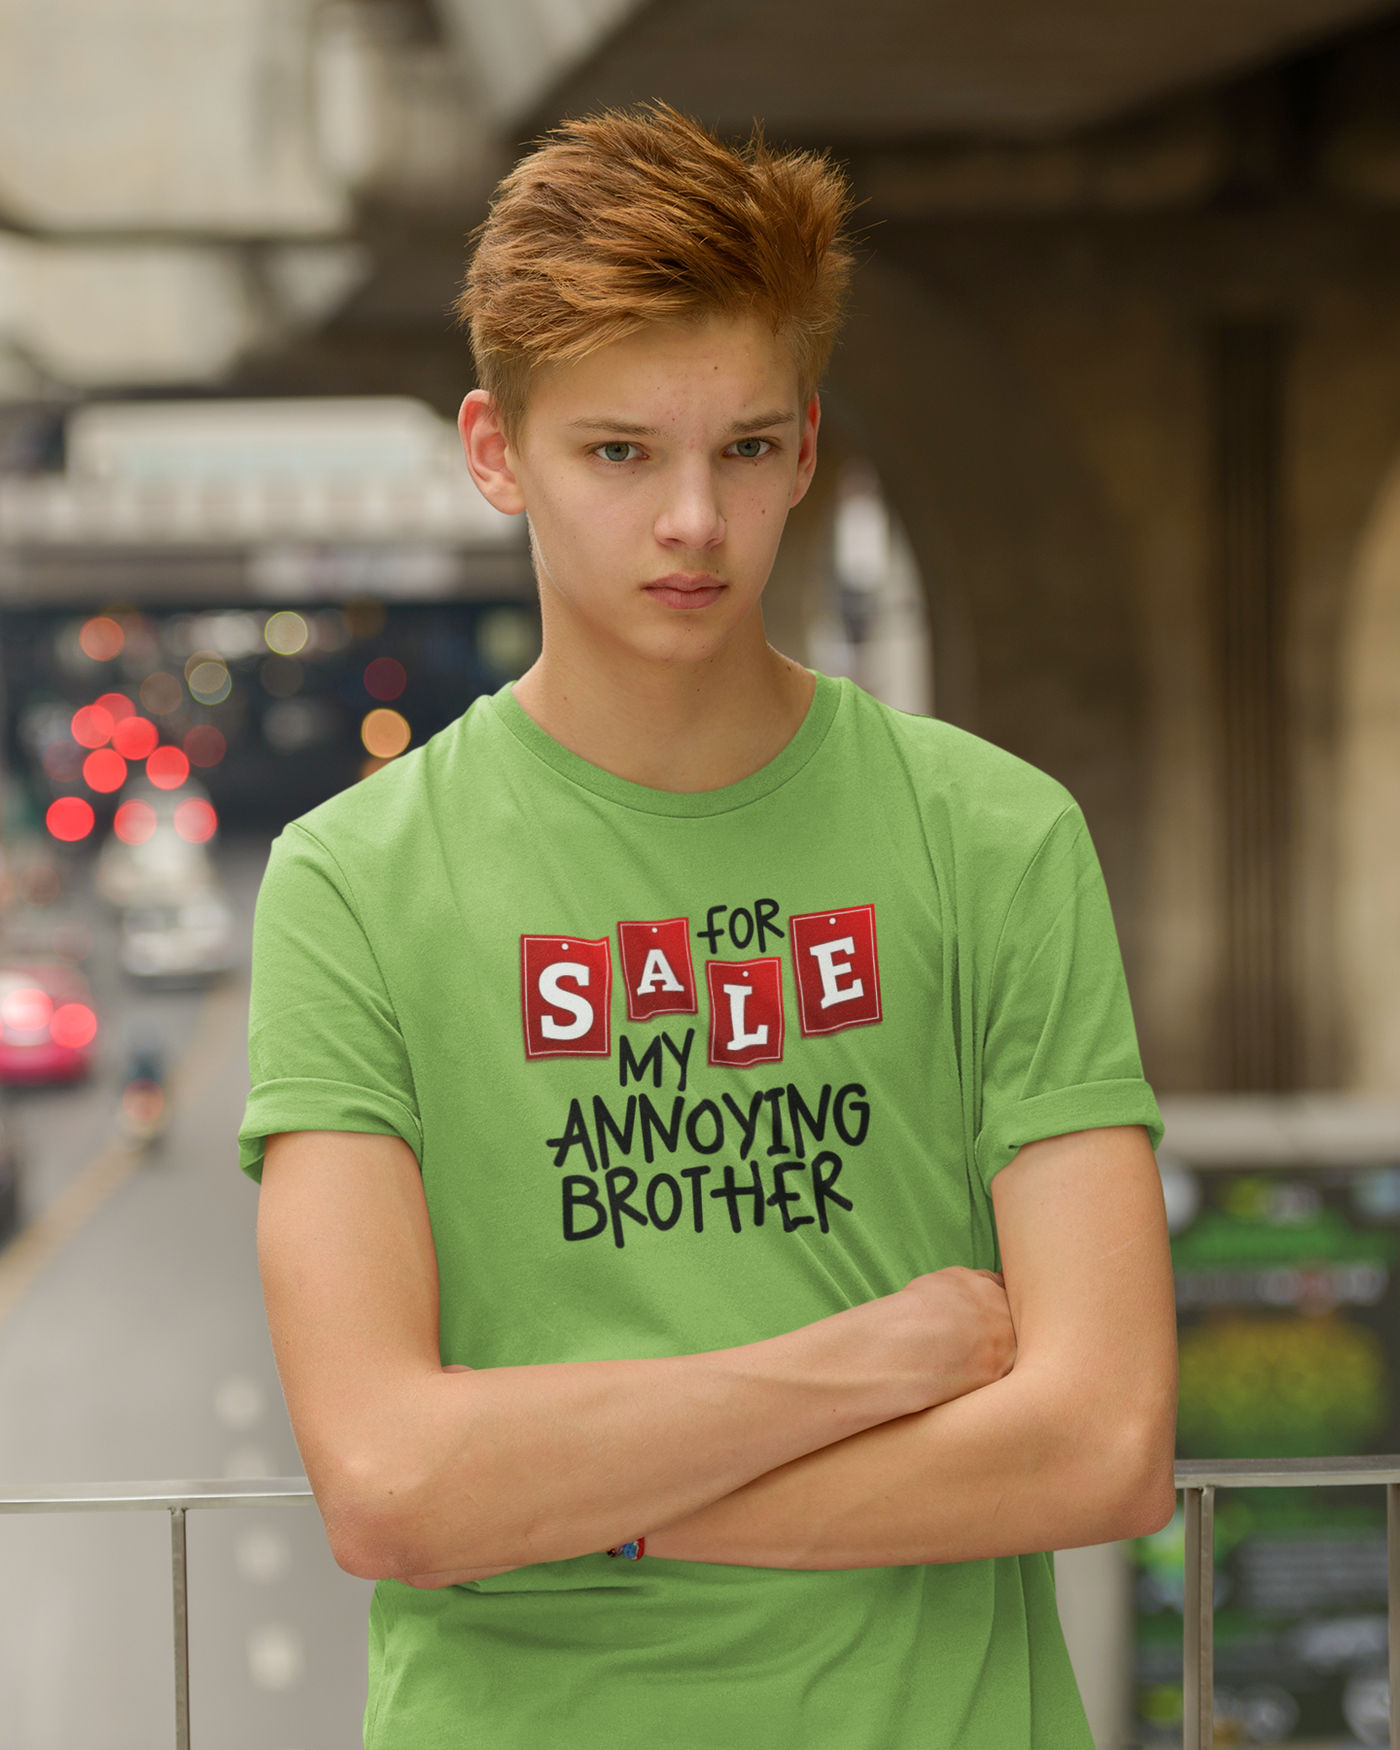 For Sale My Annoying Brother- Tee - huserdesigns